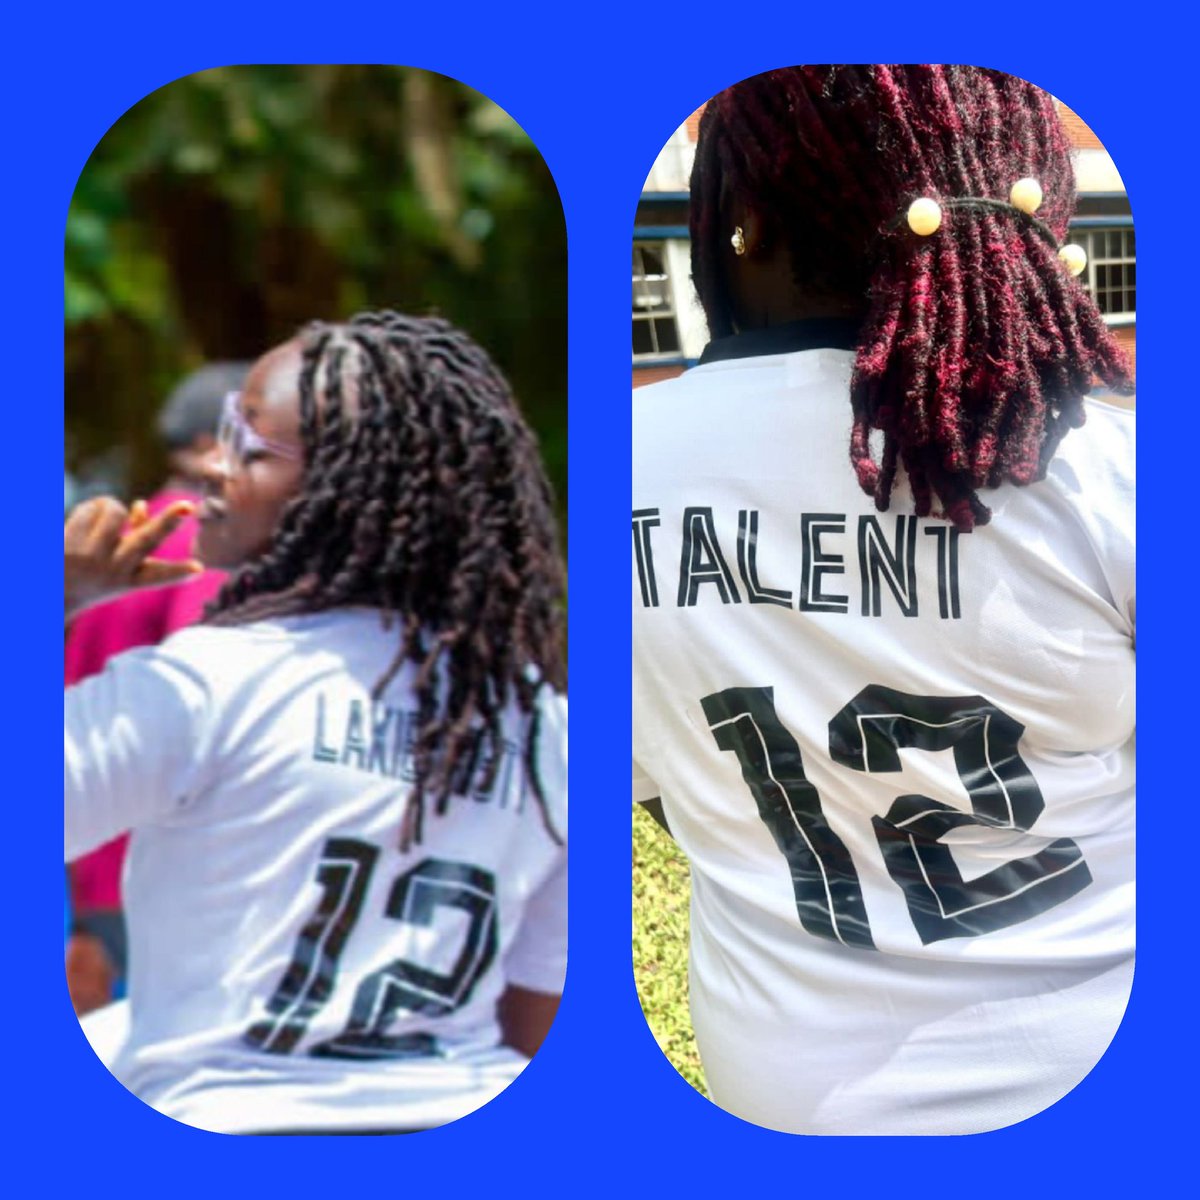 Mpozii gwe, what is your number 
#TeamGalaxy 
#KISOBALeagueSnlll